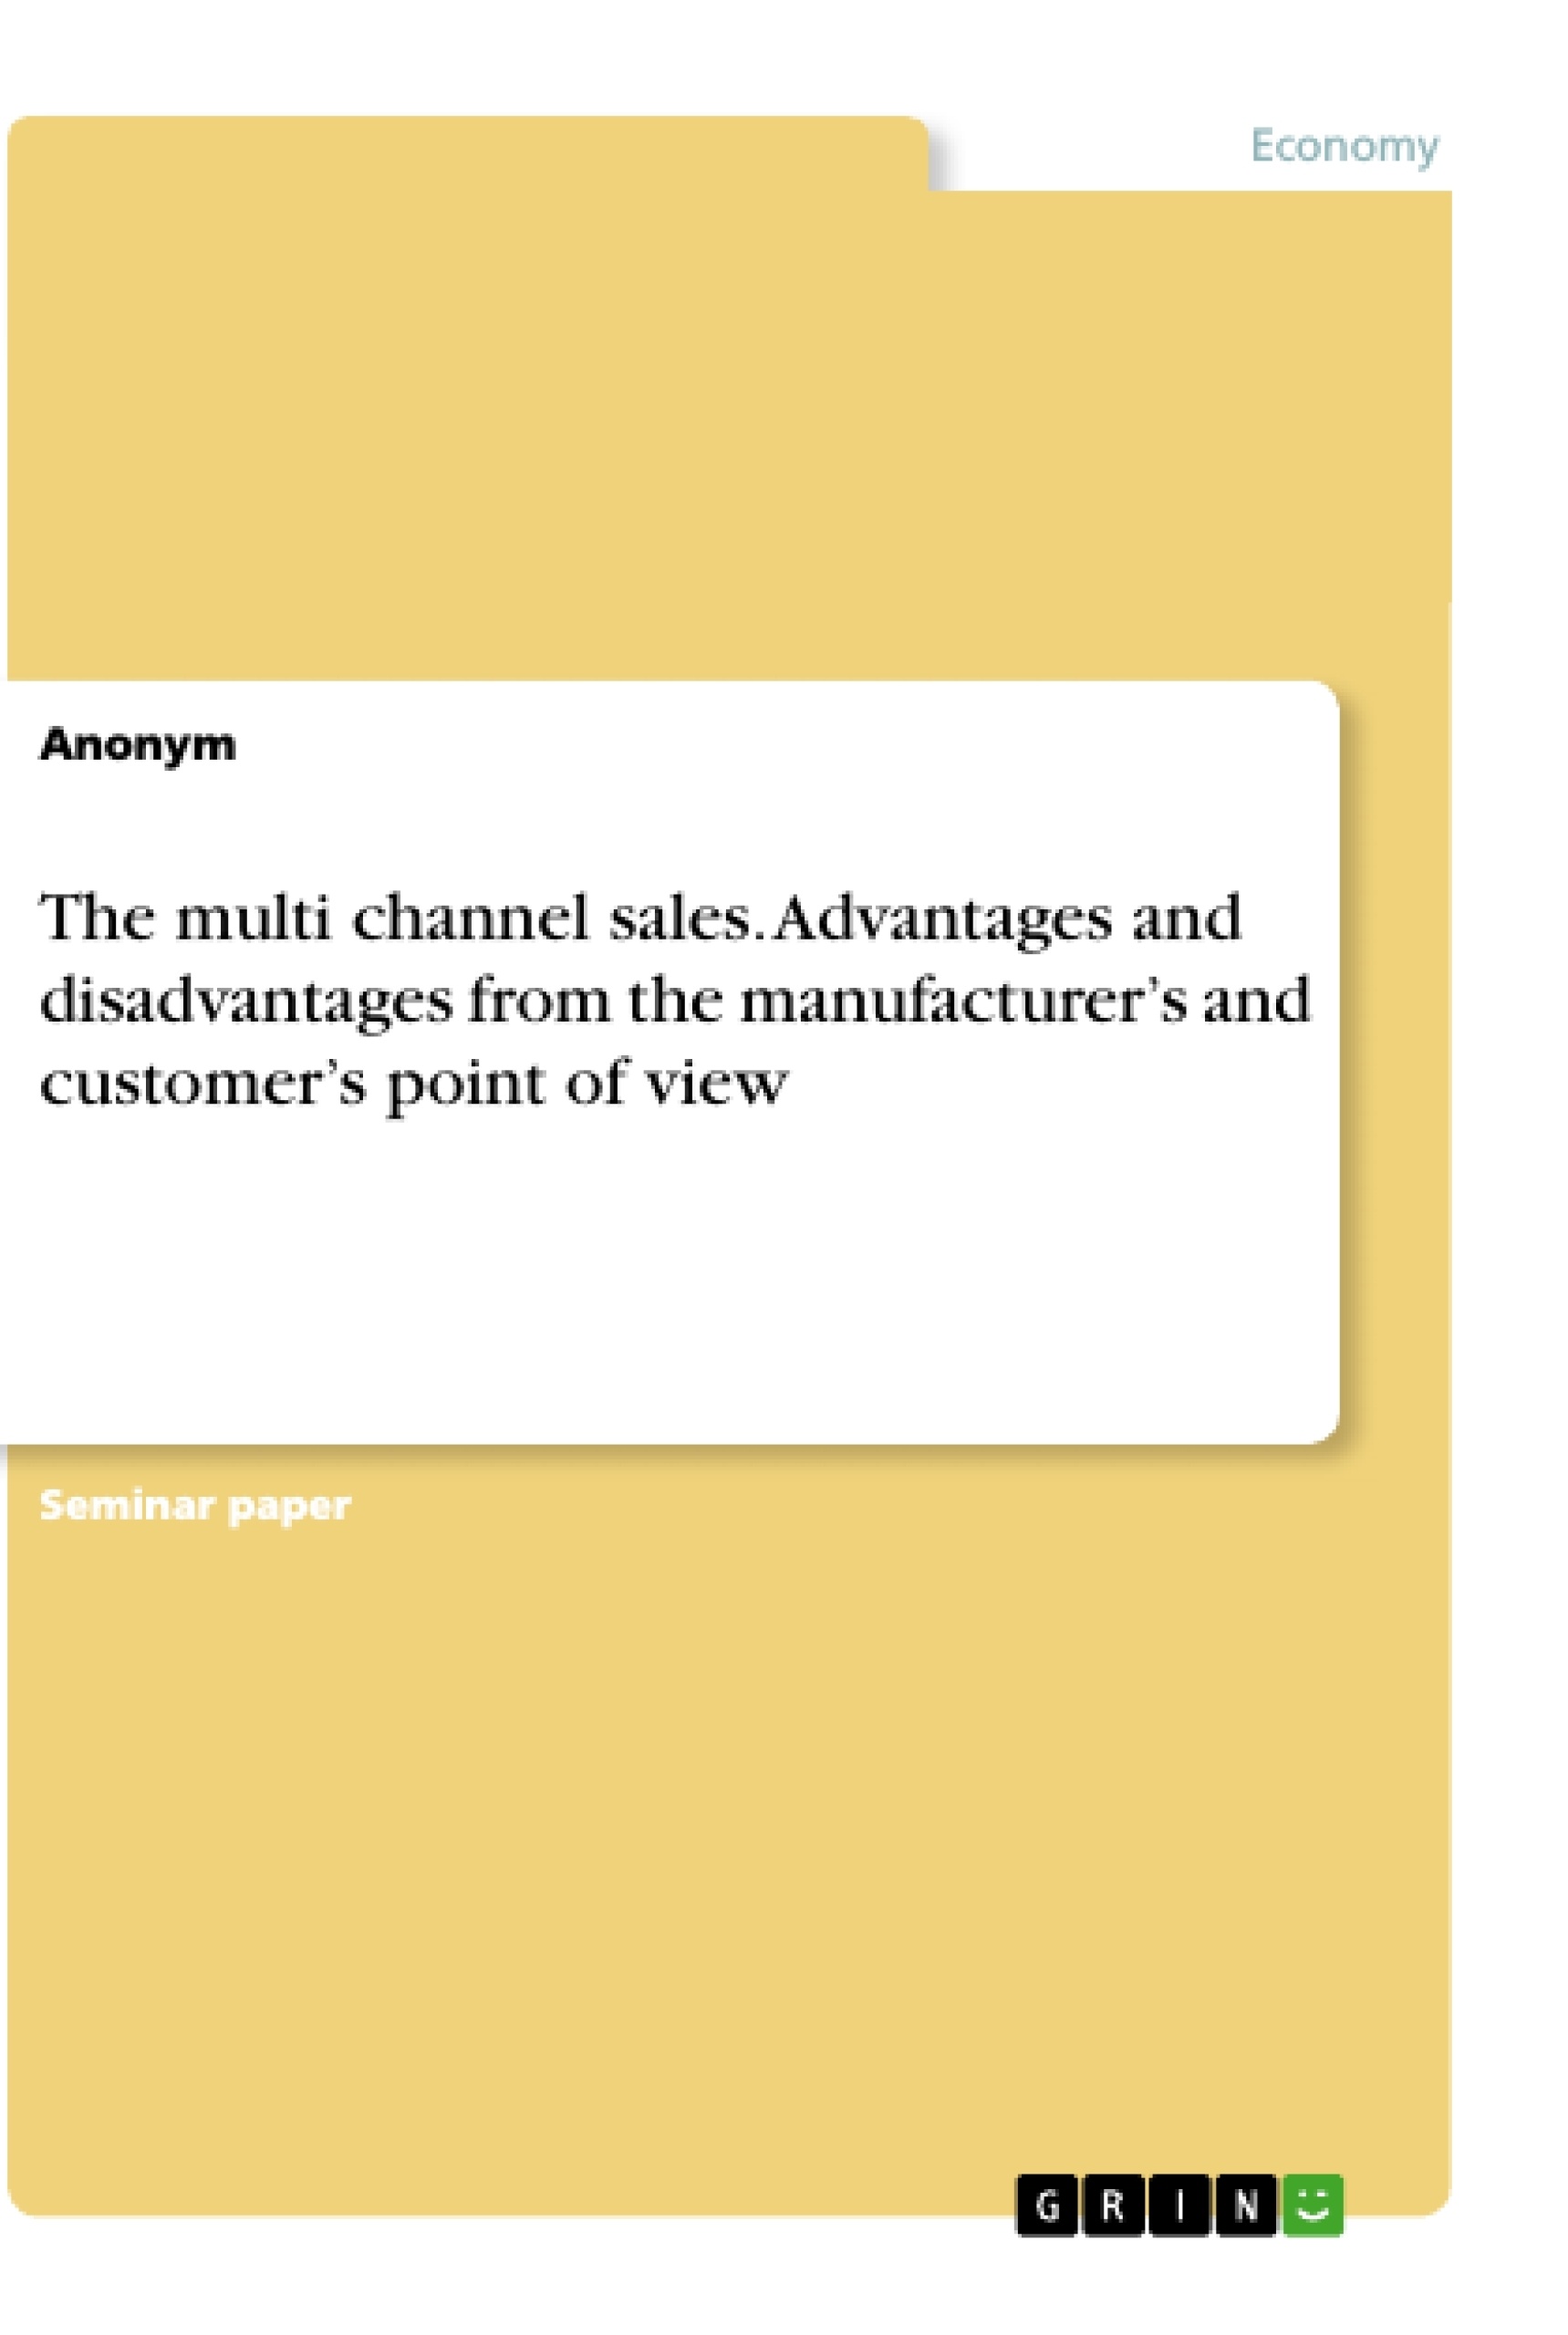 Titre: The multi channel sales. Advantages and disadvantages from the manufacturer’s and customer’s point of view